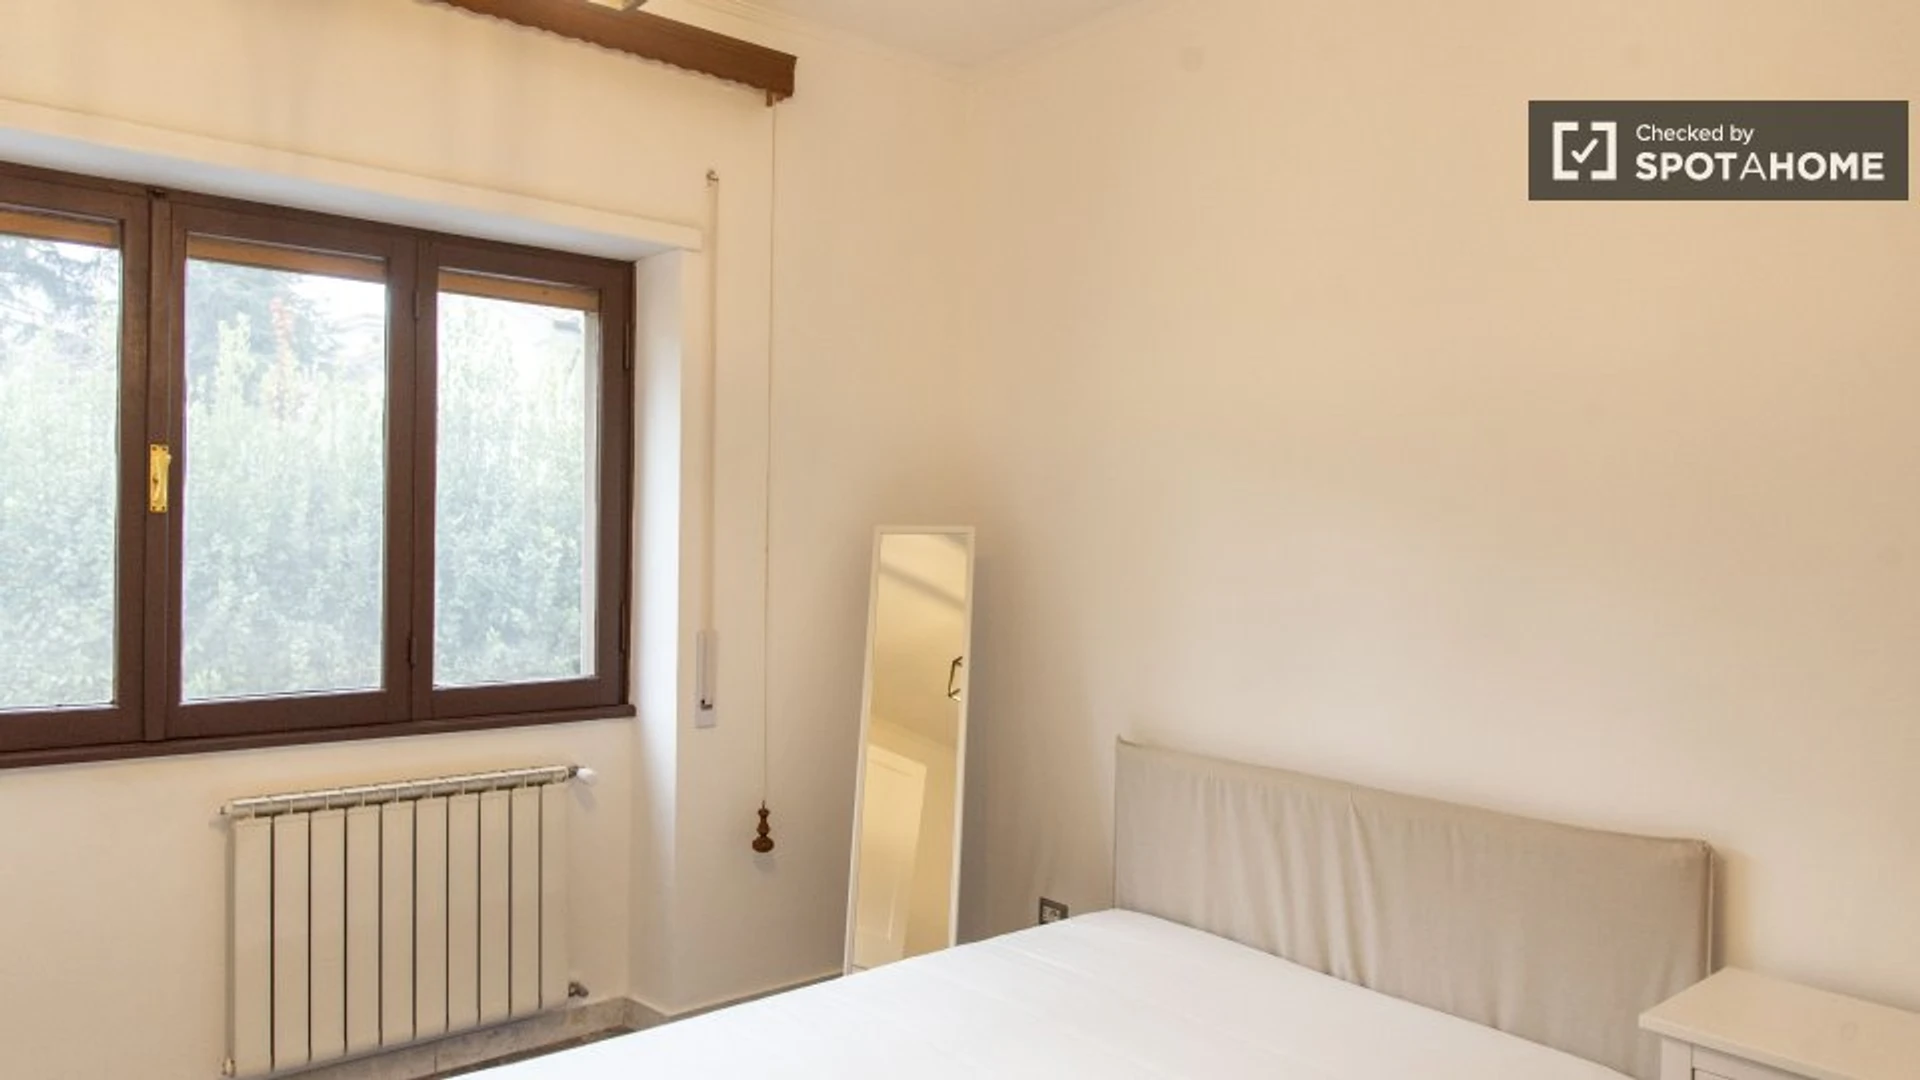 Room for rent in a shared flat in Rome